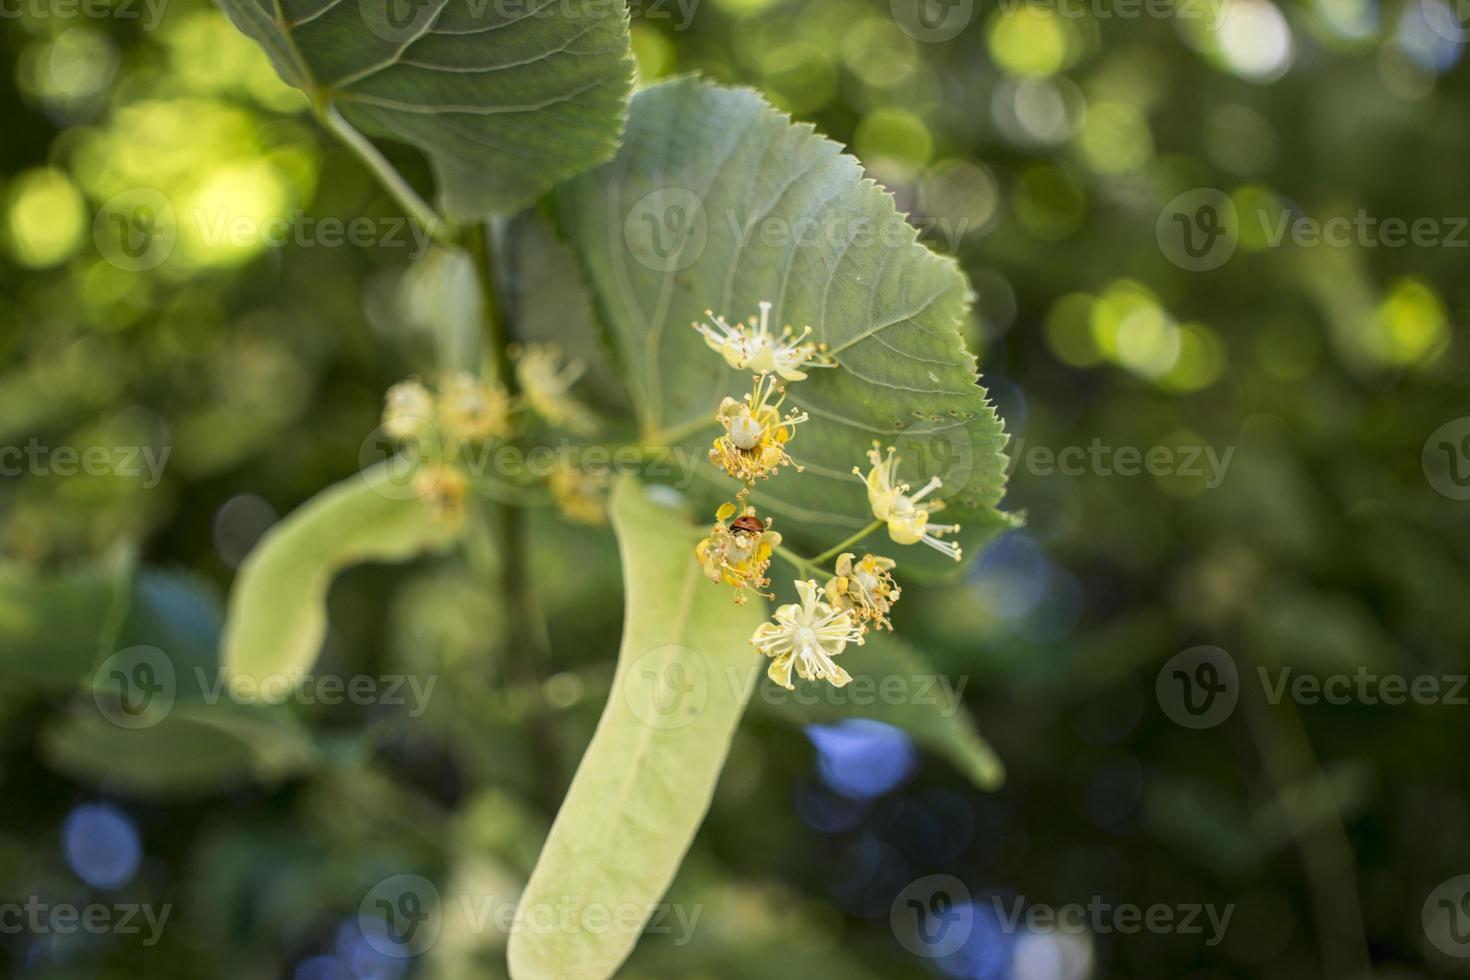 Tilia, linden tree, basswood or lime tree with unblown blossom. Tilia tree is going to bloom. A bee gathers lime-colored honey photo